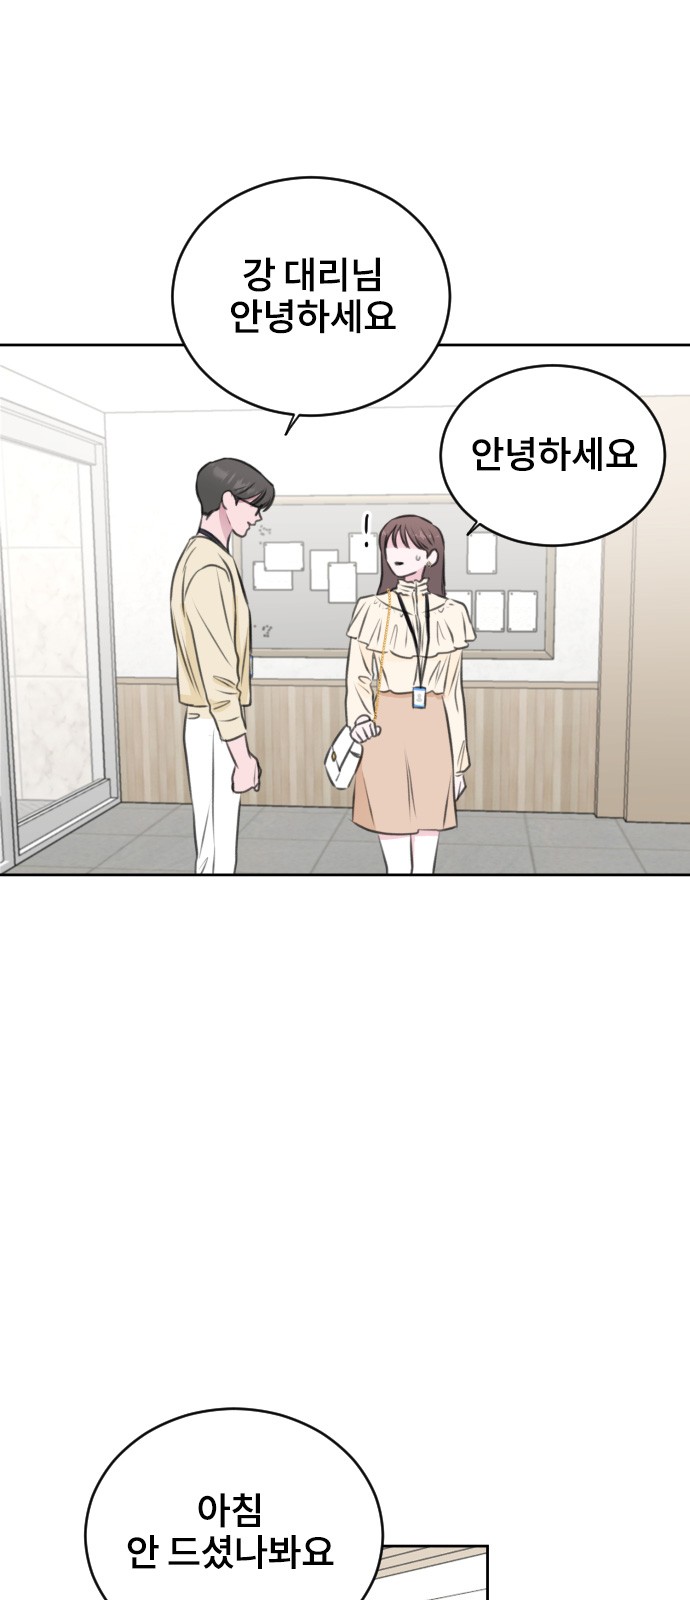 Office Marriage After Parting - Chapter 27 - Page 1